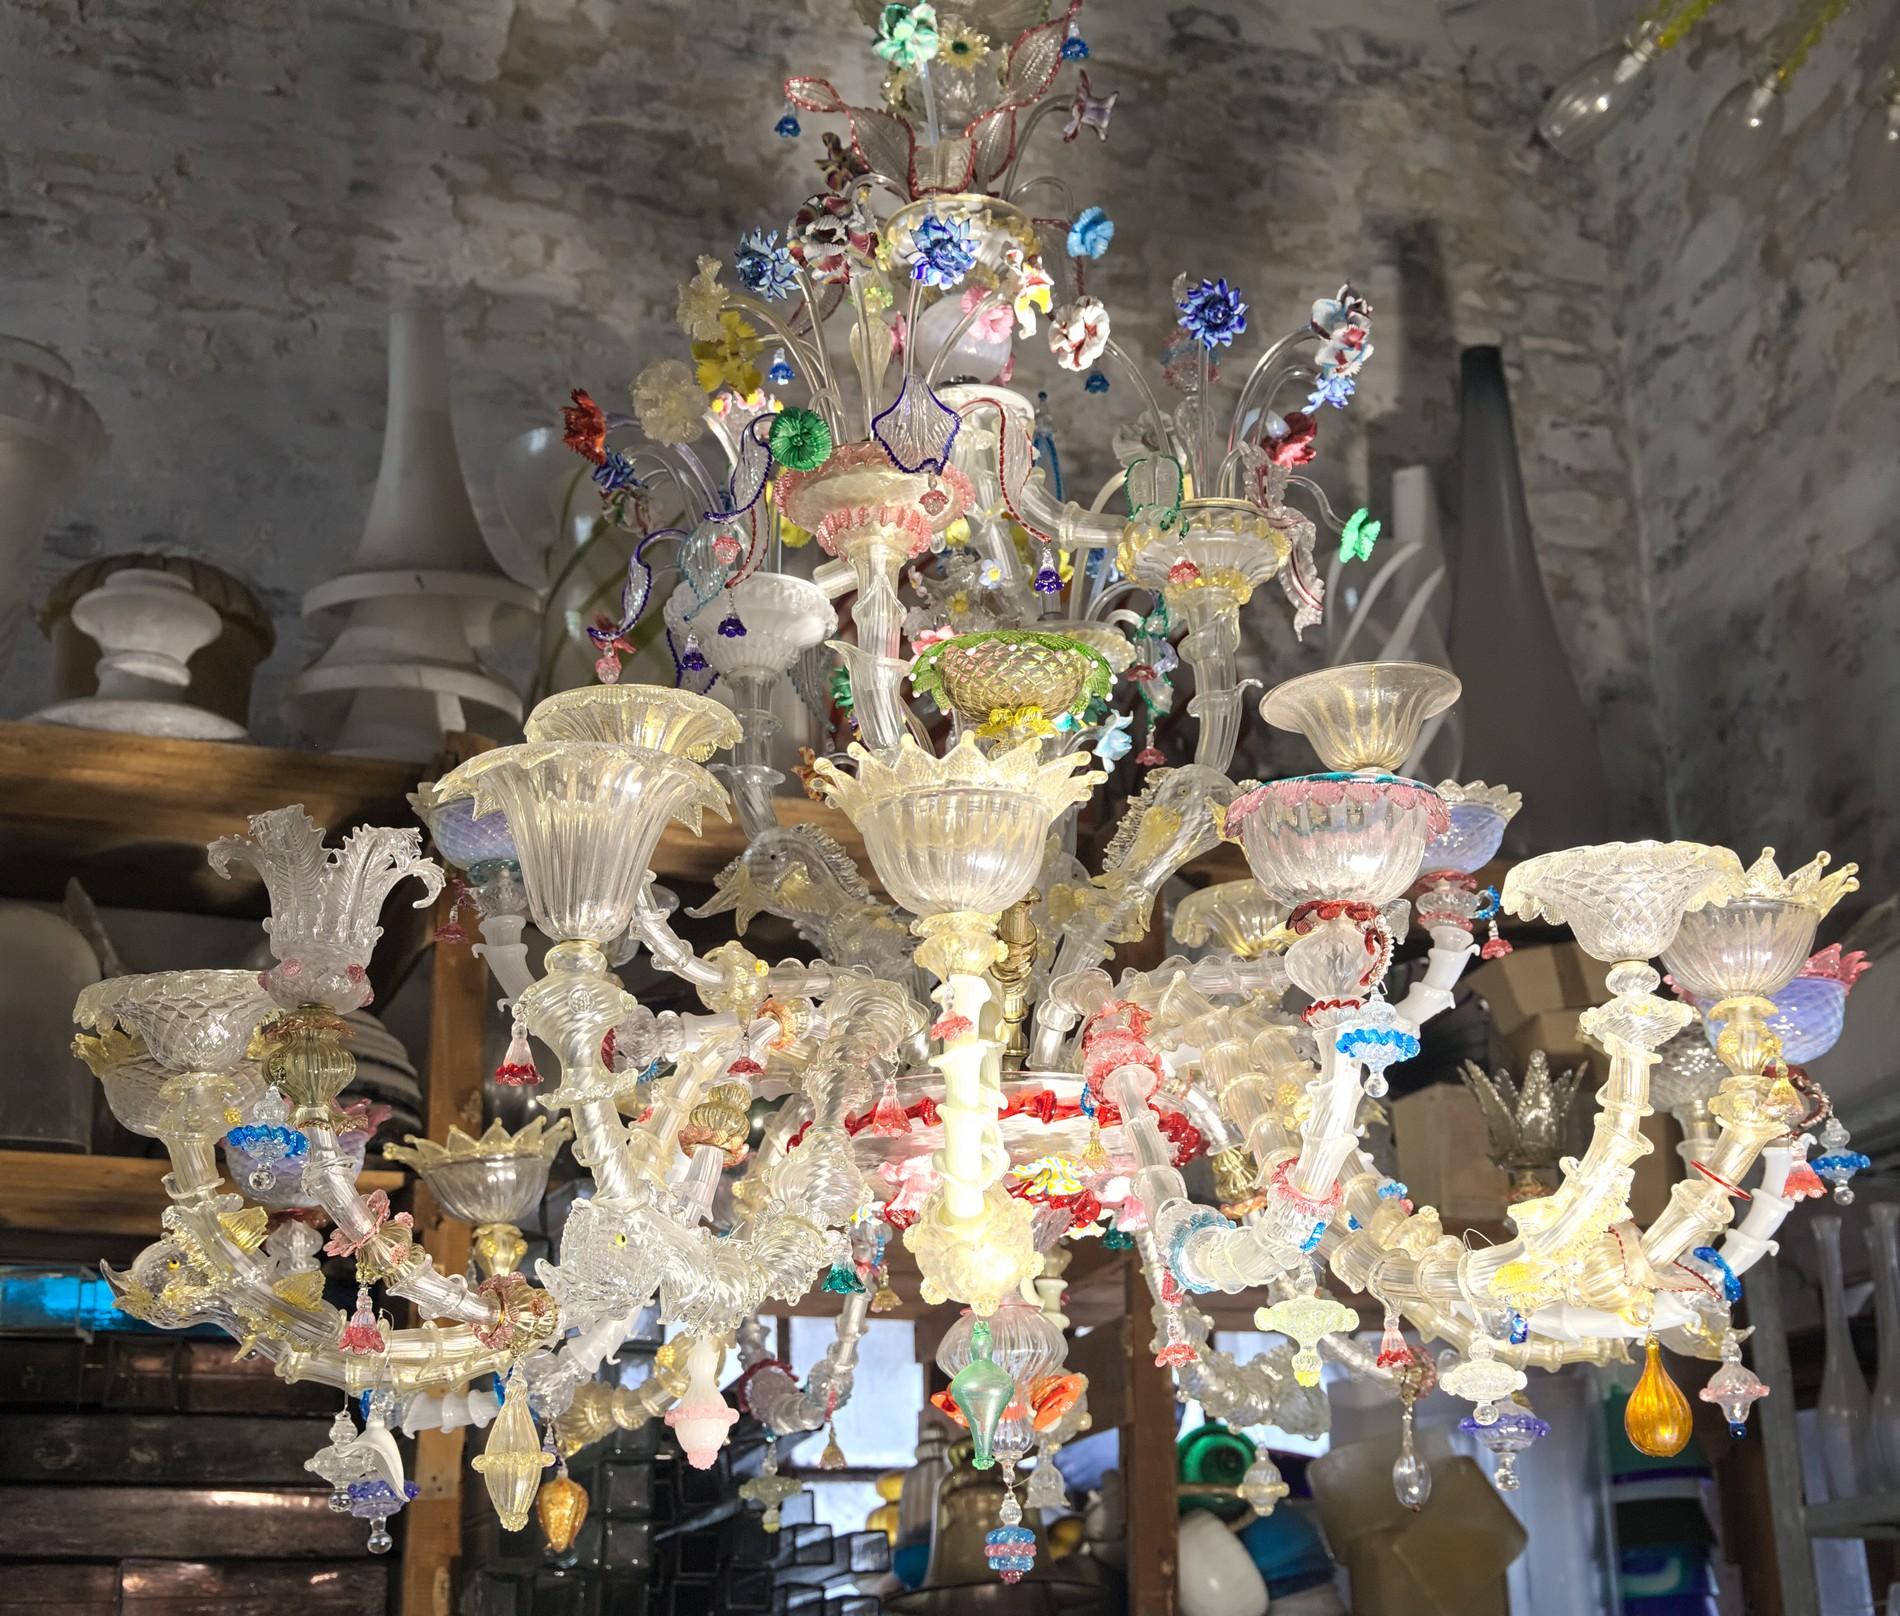 Surprising Rezzonico chandelier made of an infinitive number of glass, each element is different from the other. I made a video for whoever is interested in seeing the complexity of this intriguing chandelier.
It's a triumph of flowers, ducks, fish,